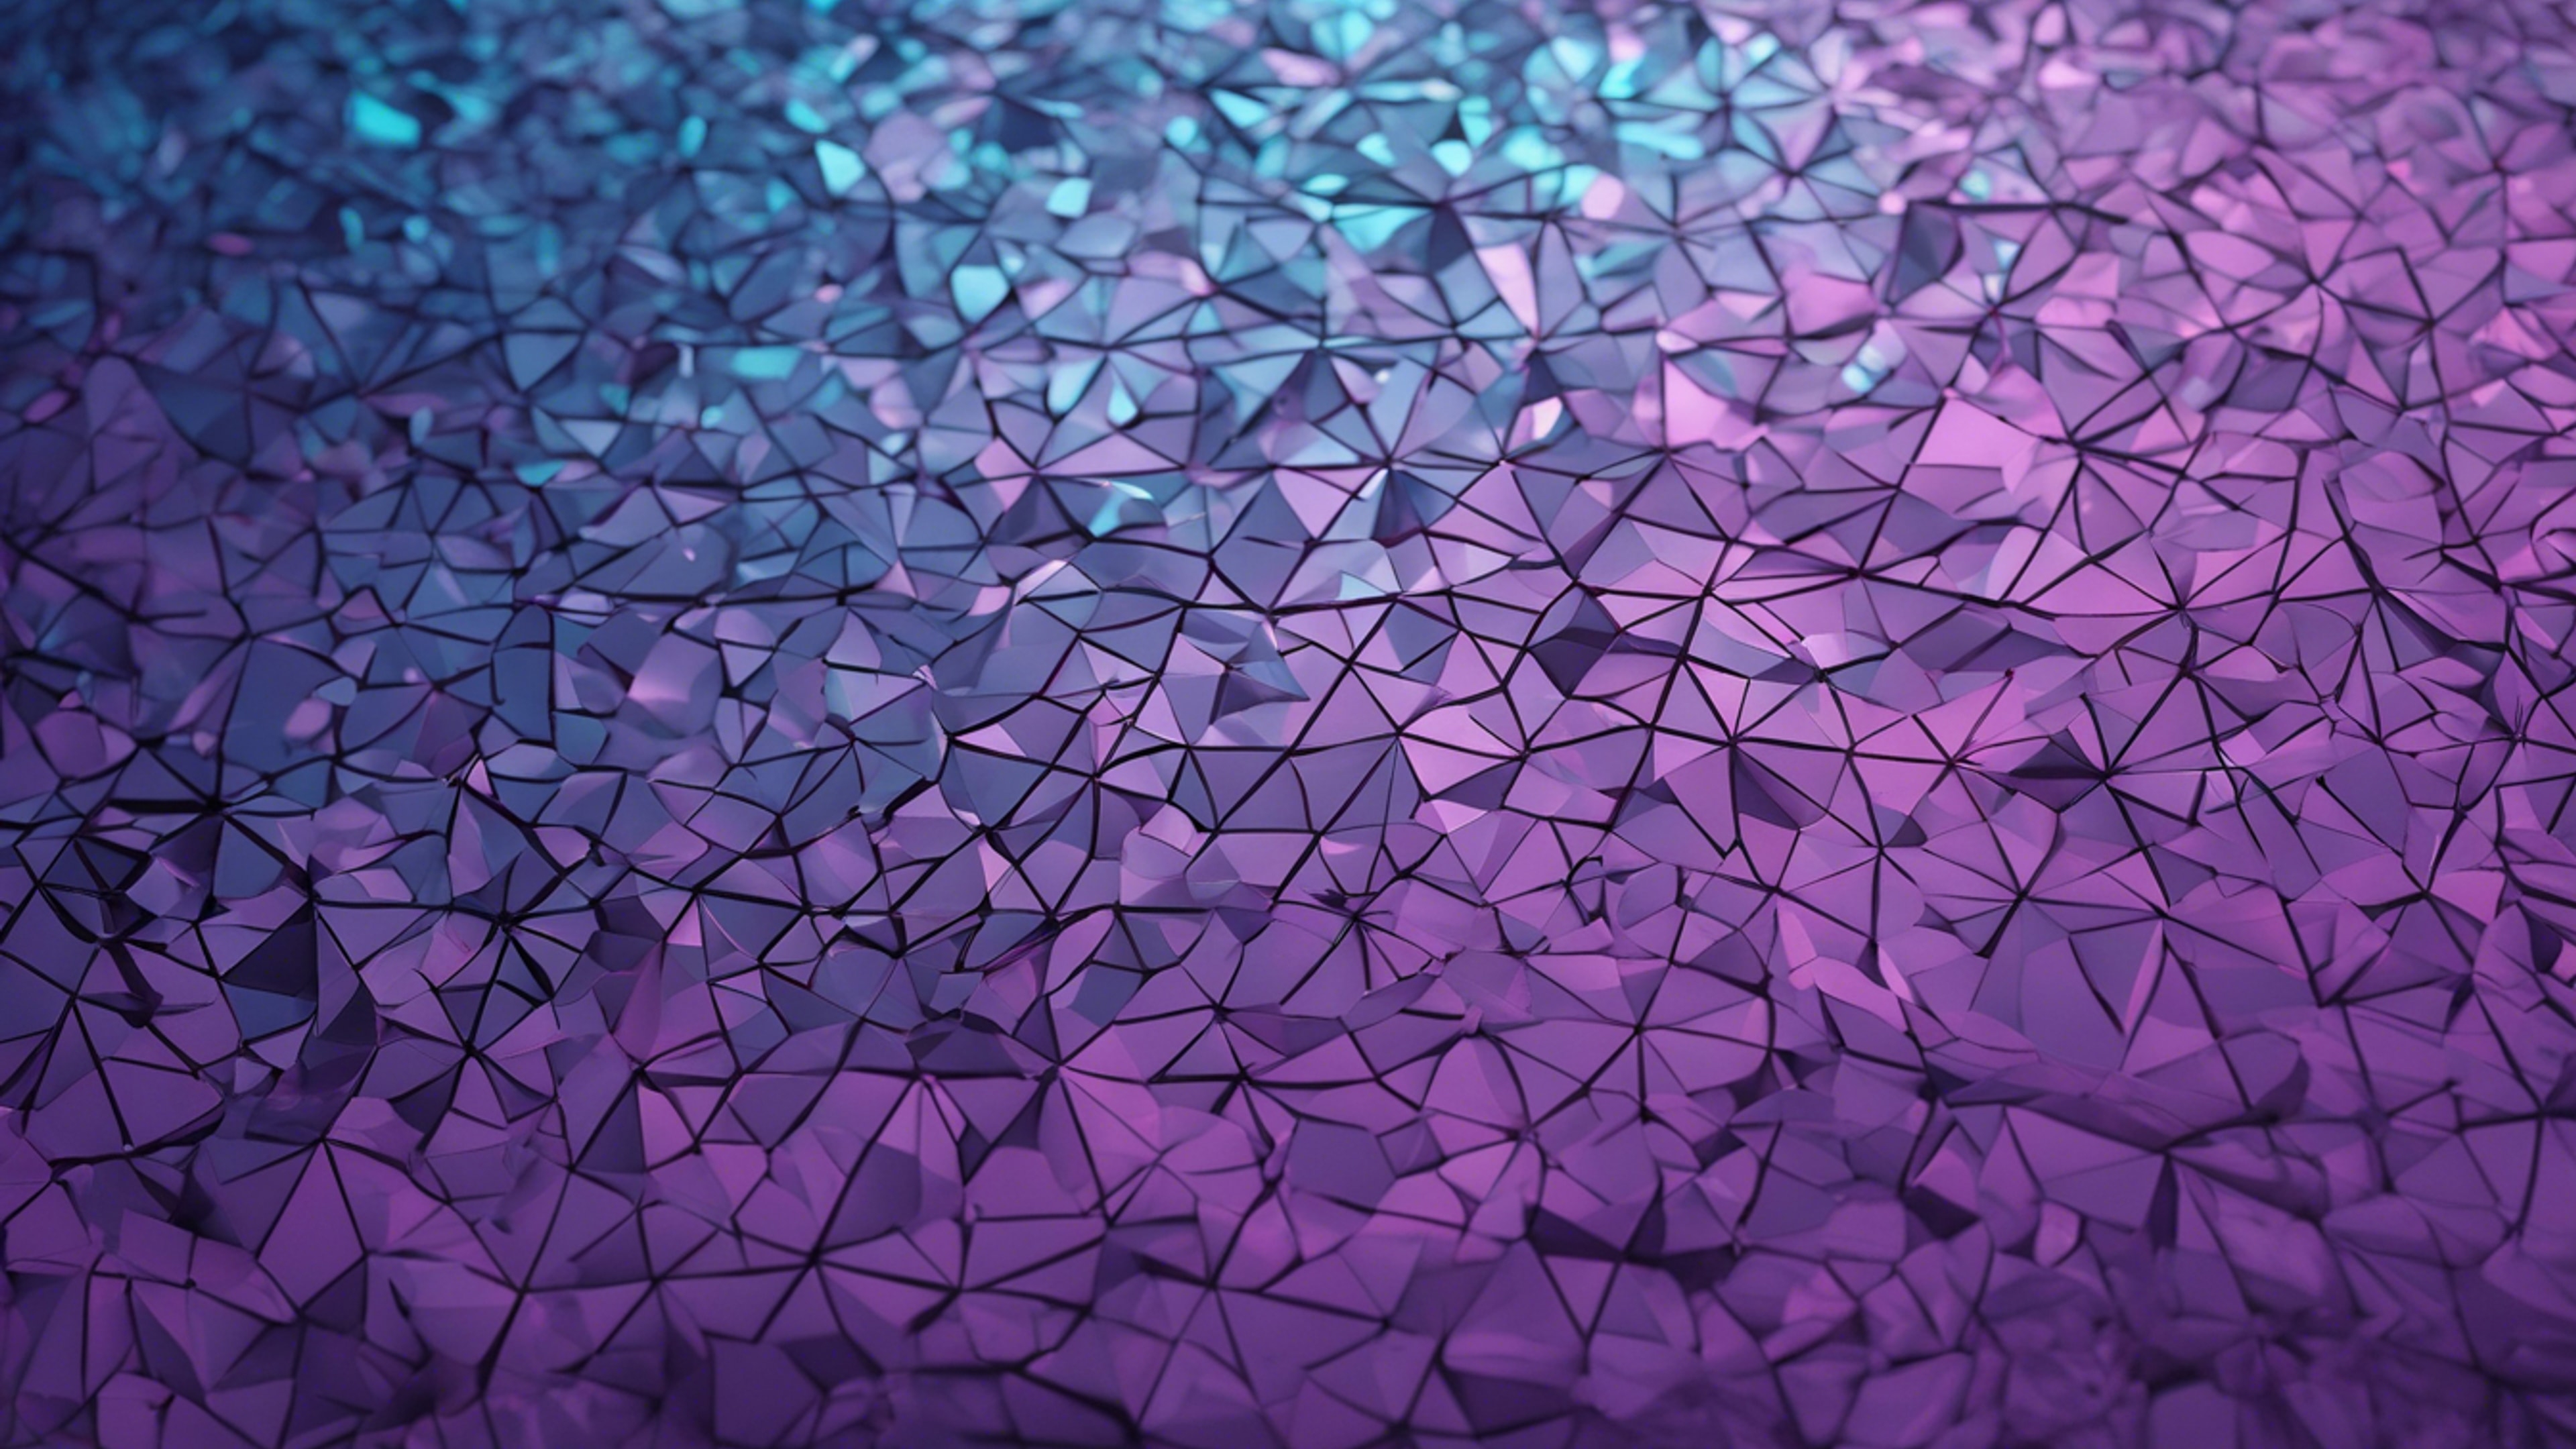 A minimalistic geometric pattern with gradients of cool blues and rich purples. Тапет[0965c8f37dc94faa9227]